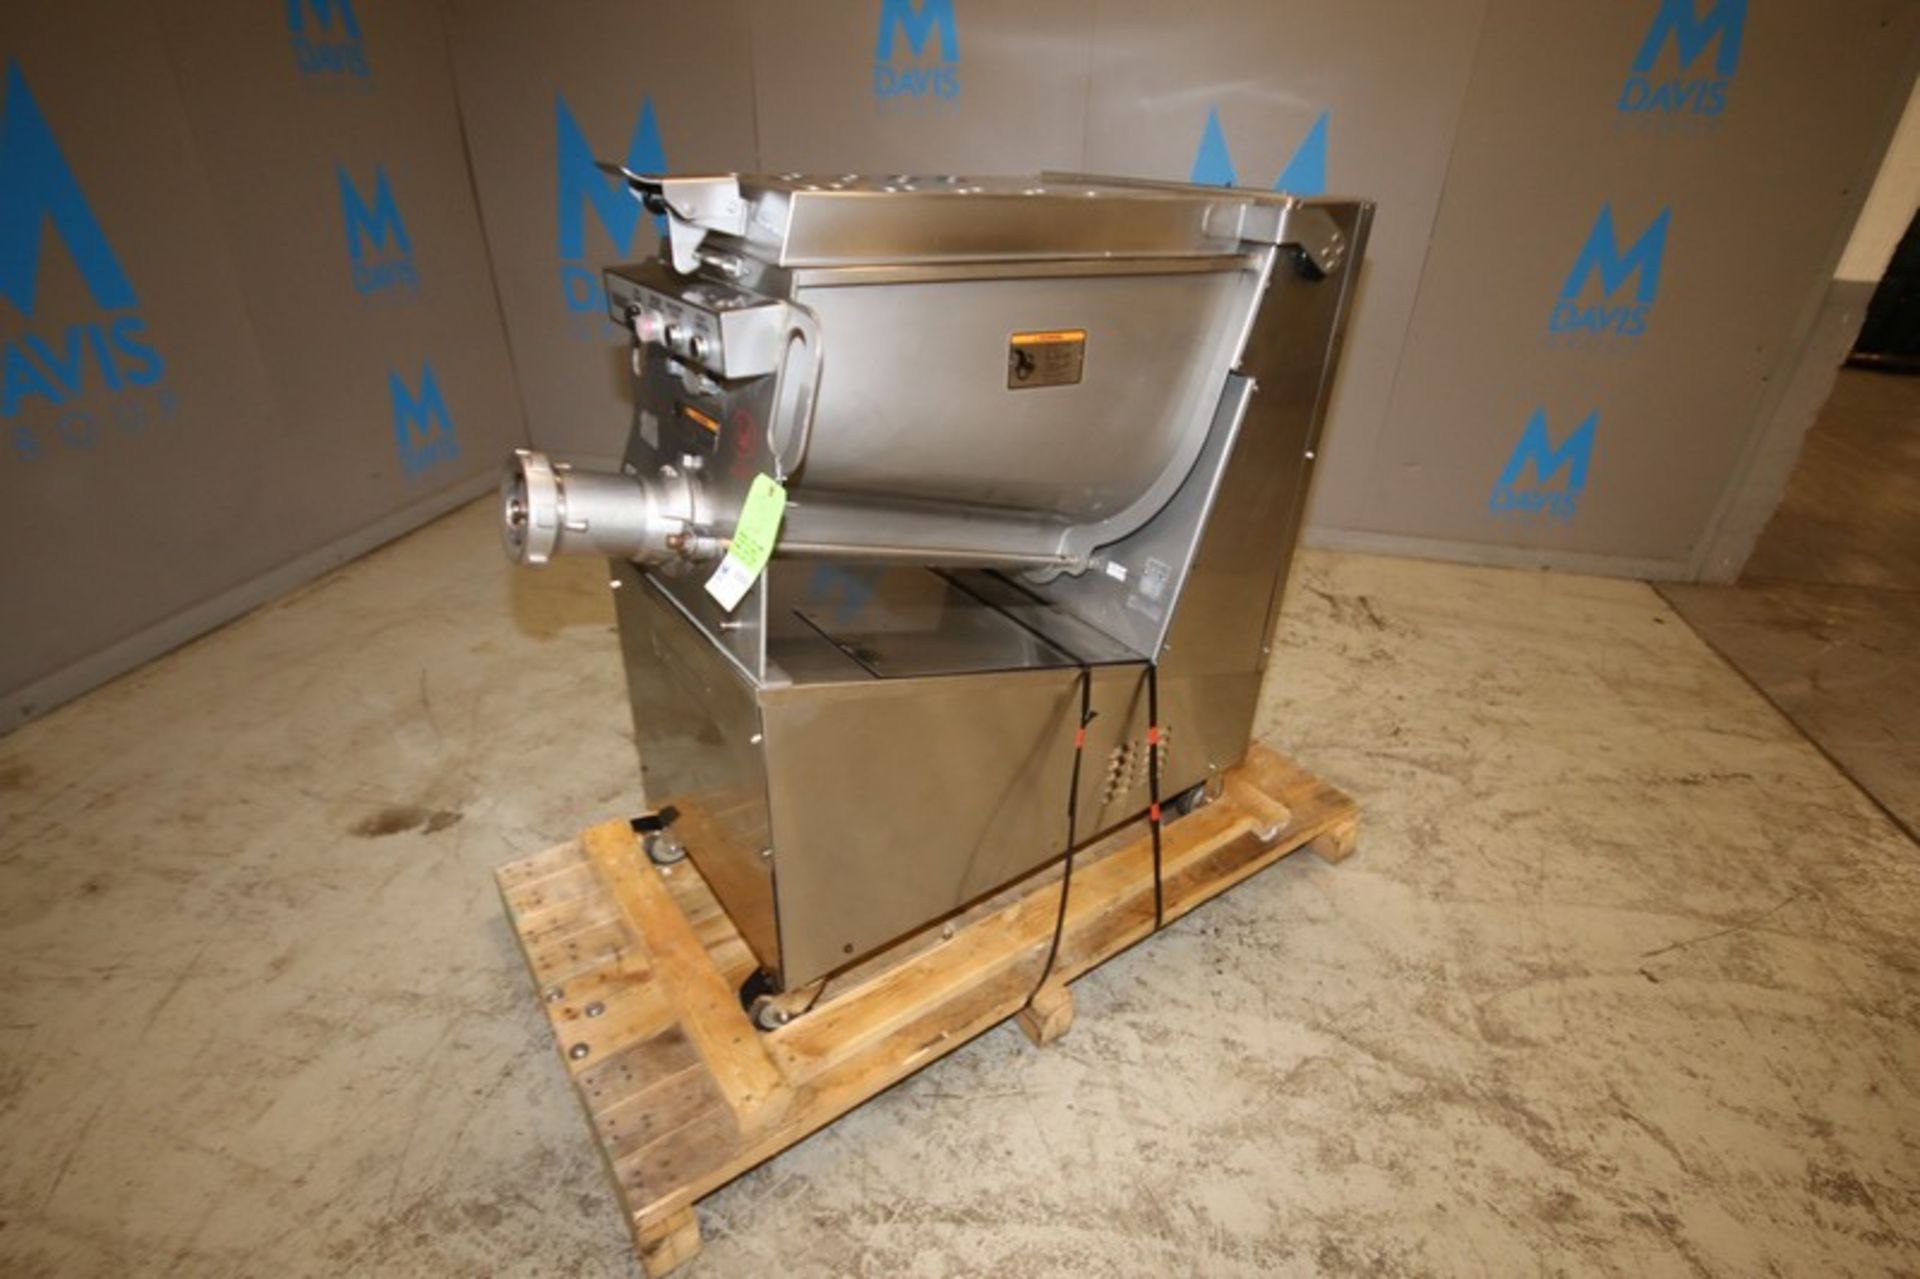 Hobart S/S 150 lb. Capacity Portable Meat Mixer / Grinder, Model MG1532, SN 27-1183-453, with